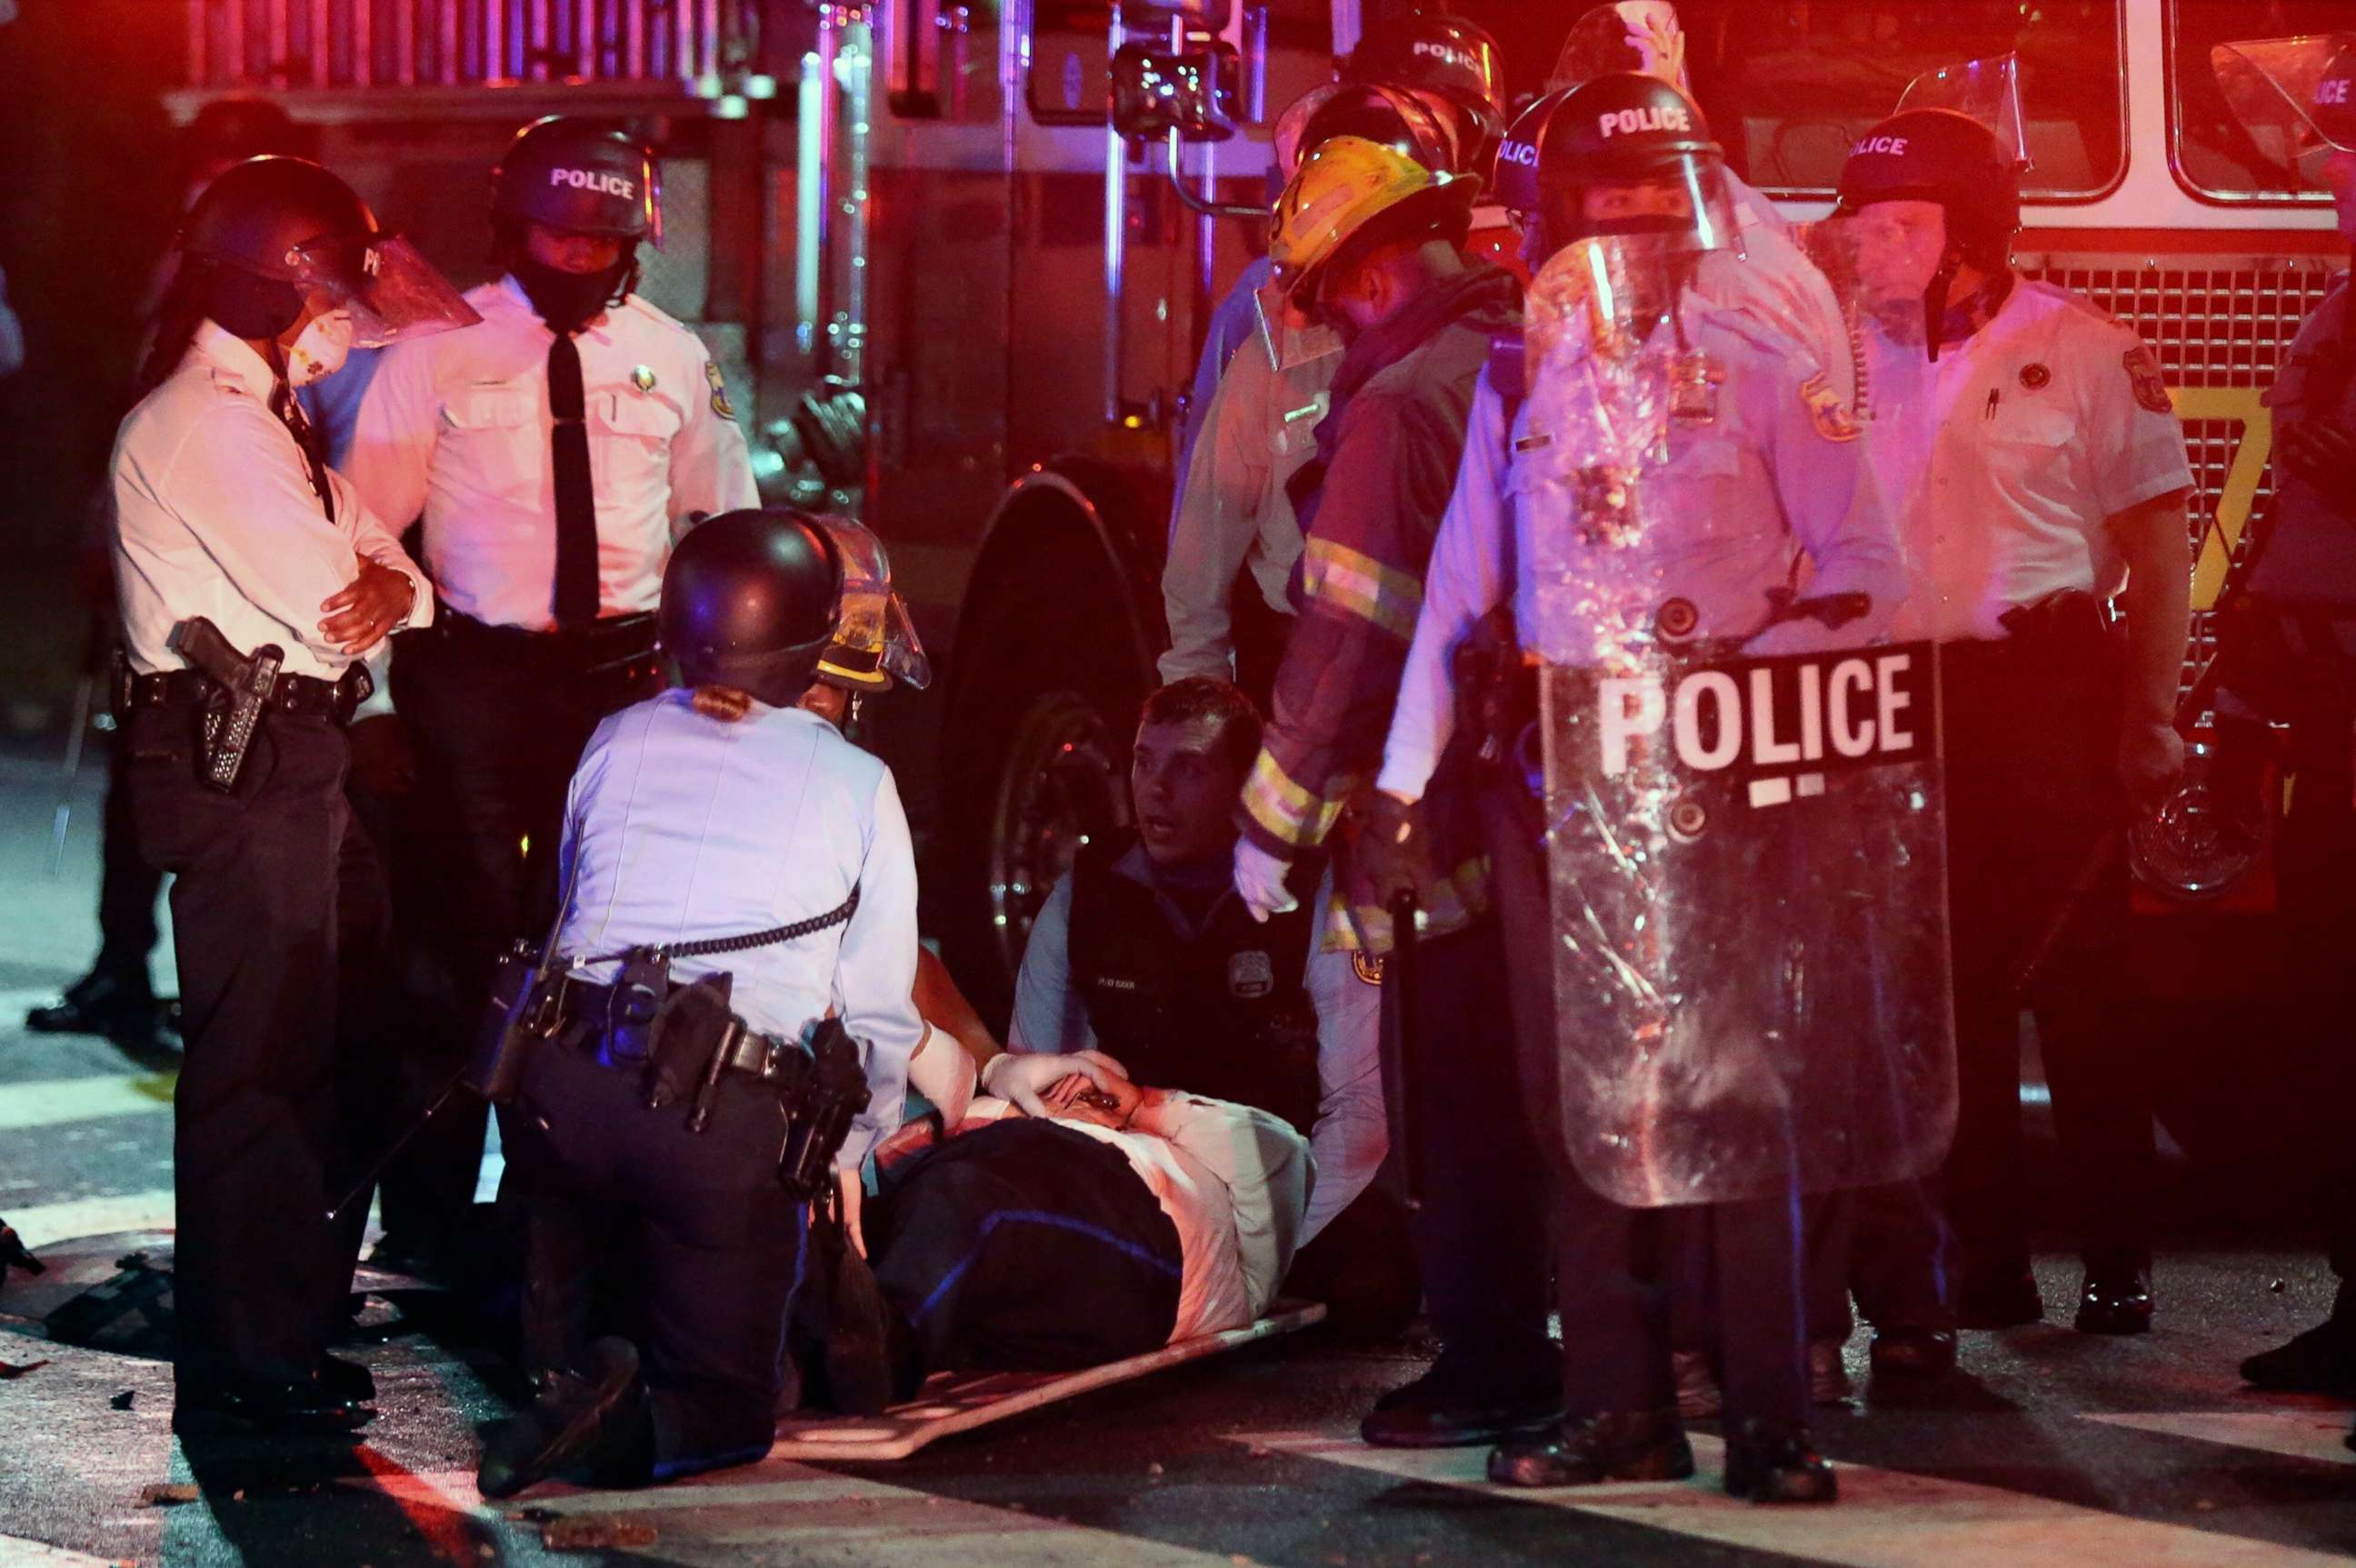 PHOTO: A police officer lies on the ground before being loaded into an ambulance on 52nd Street in West Philadelphia, Oct. 27, 2020.